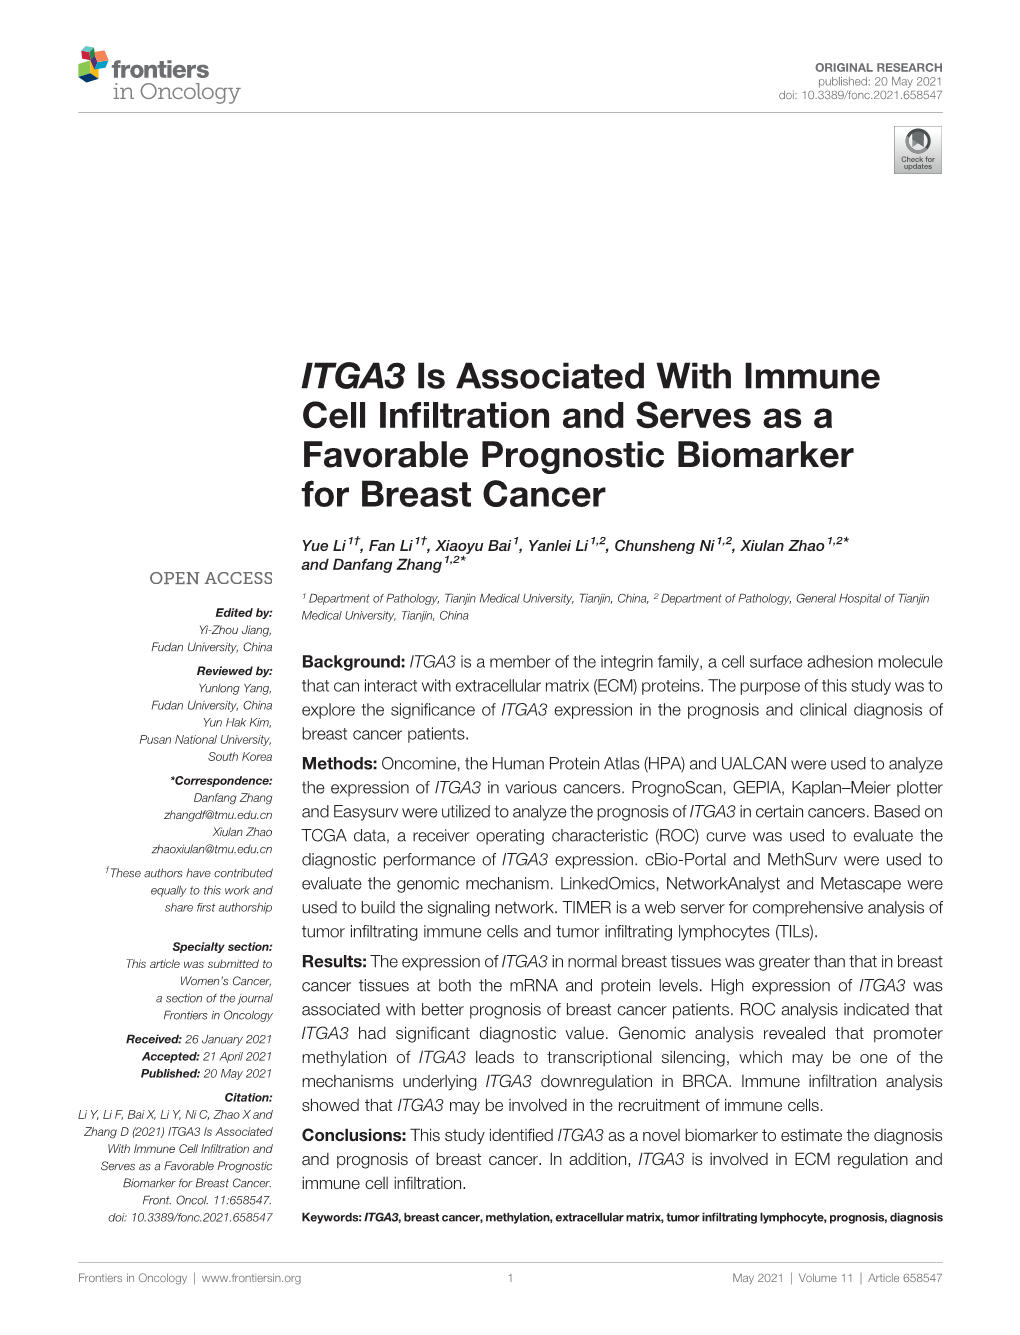 ITGA3 Is Associated with Immune Cell Infiltration and Serves As A